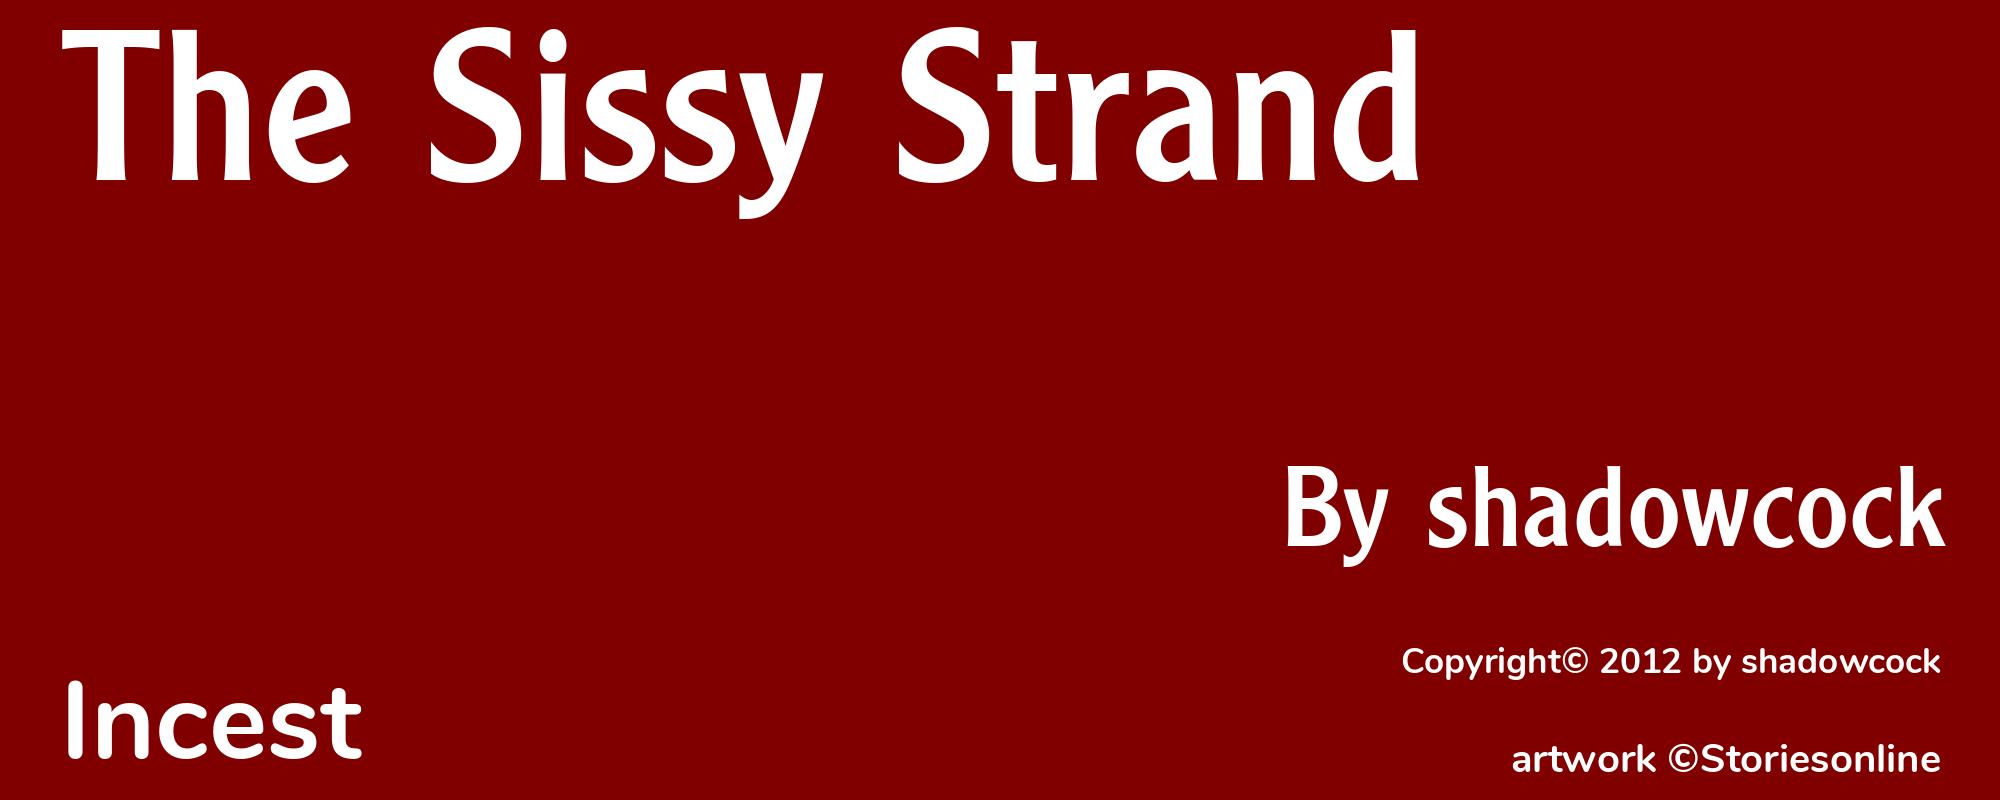 The Sissy Strand - Cover